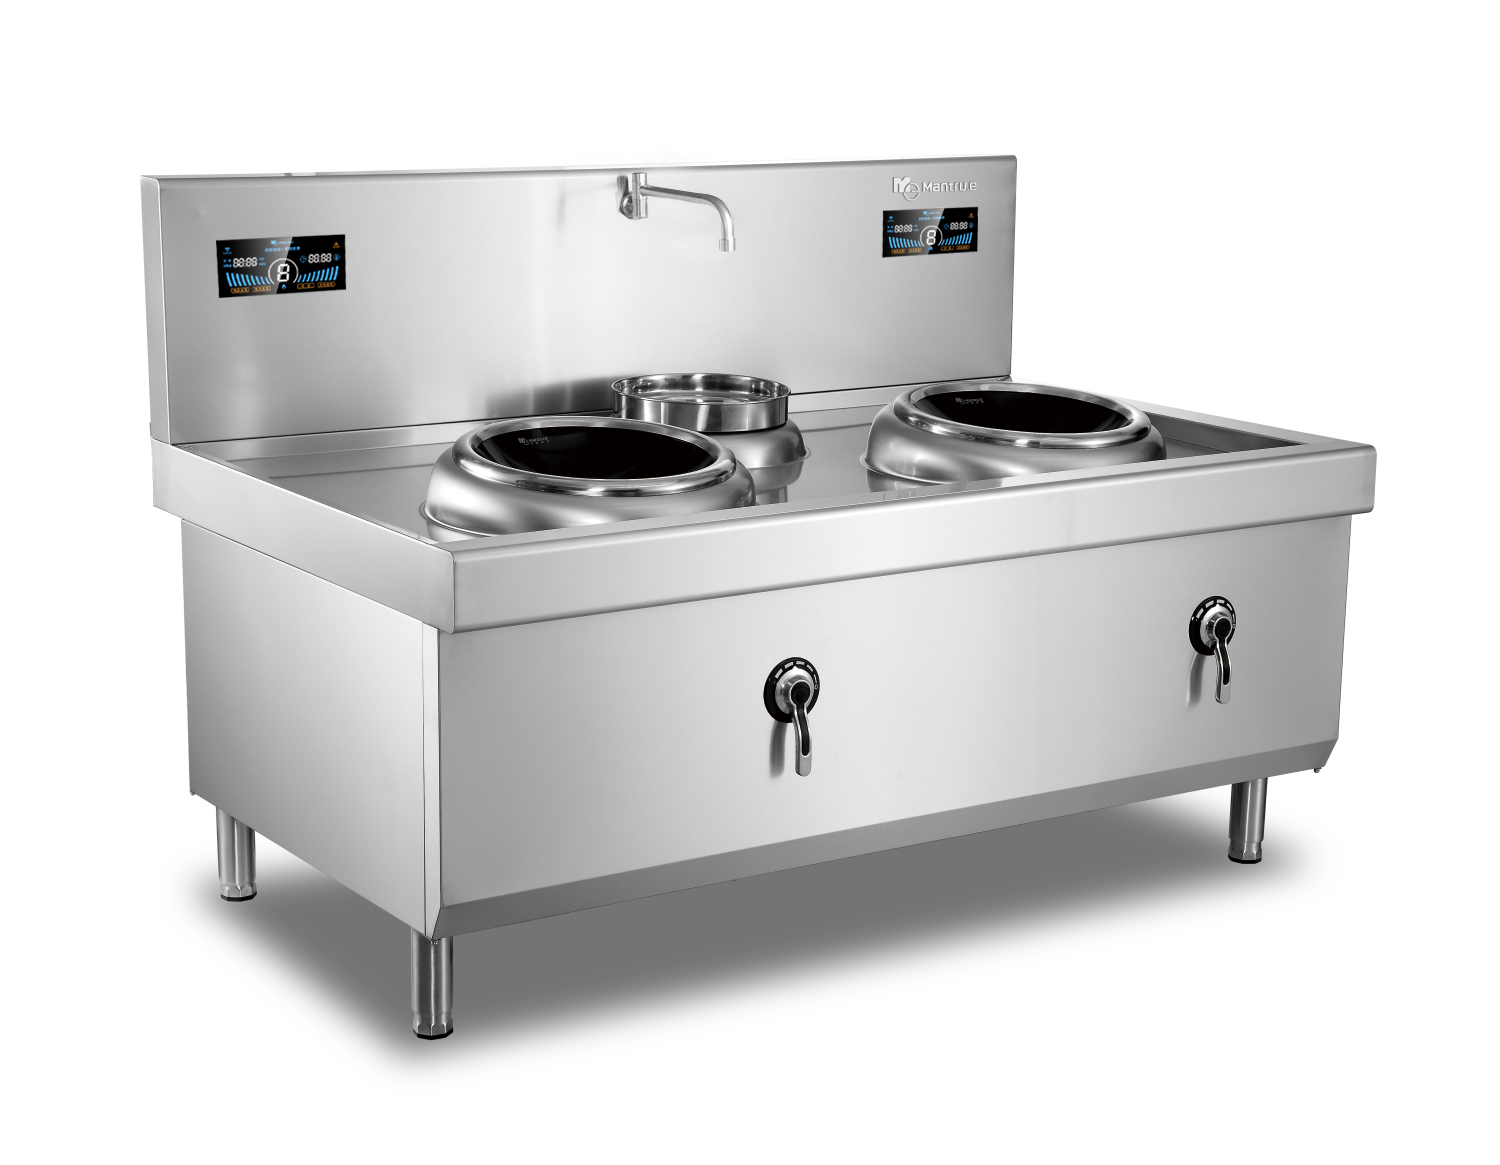 400mm Double Burner with one basin Induction Wok